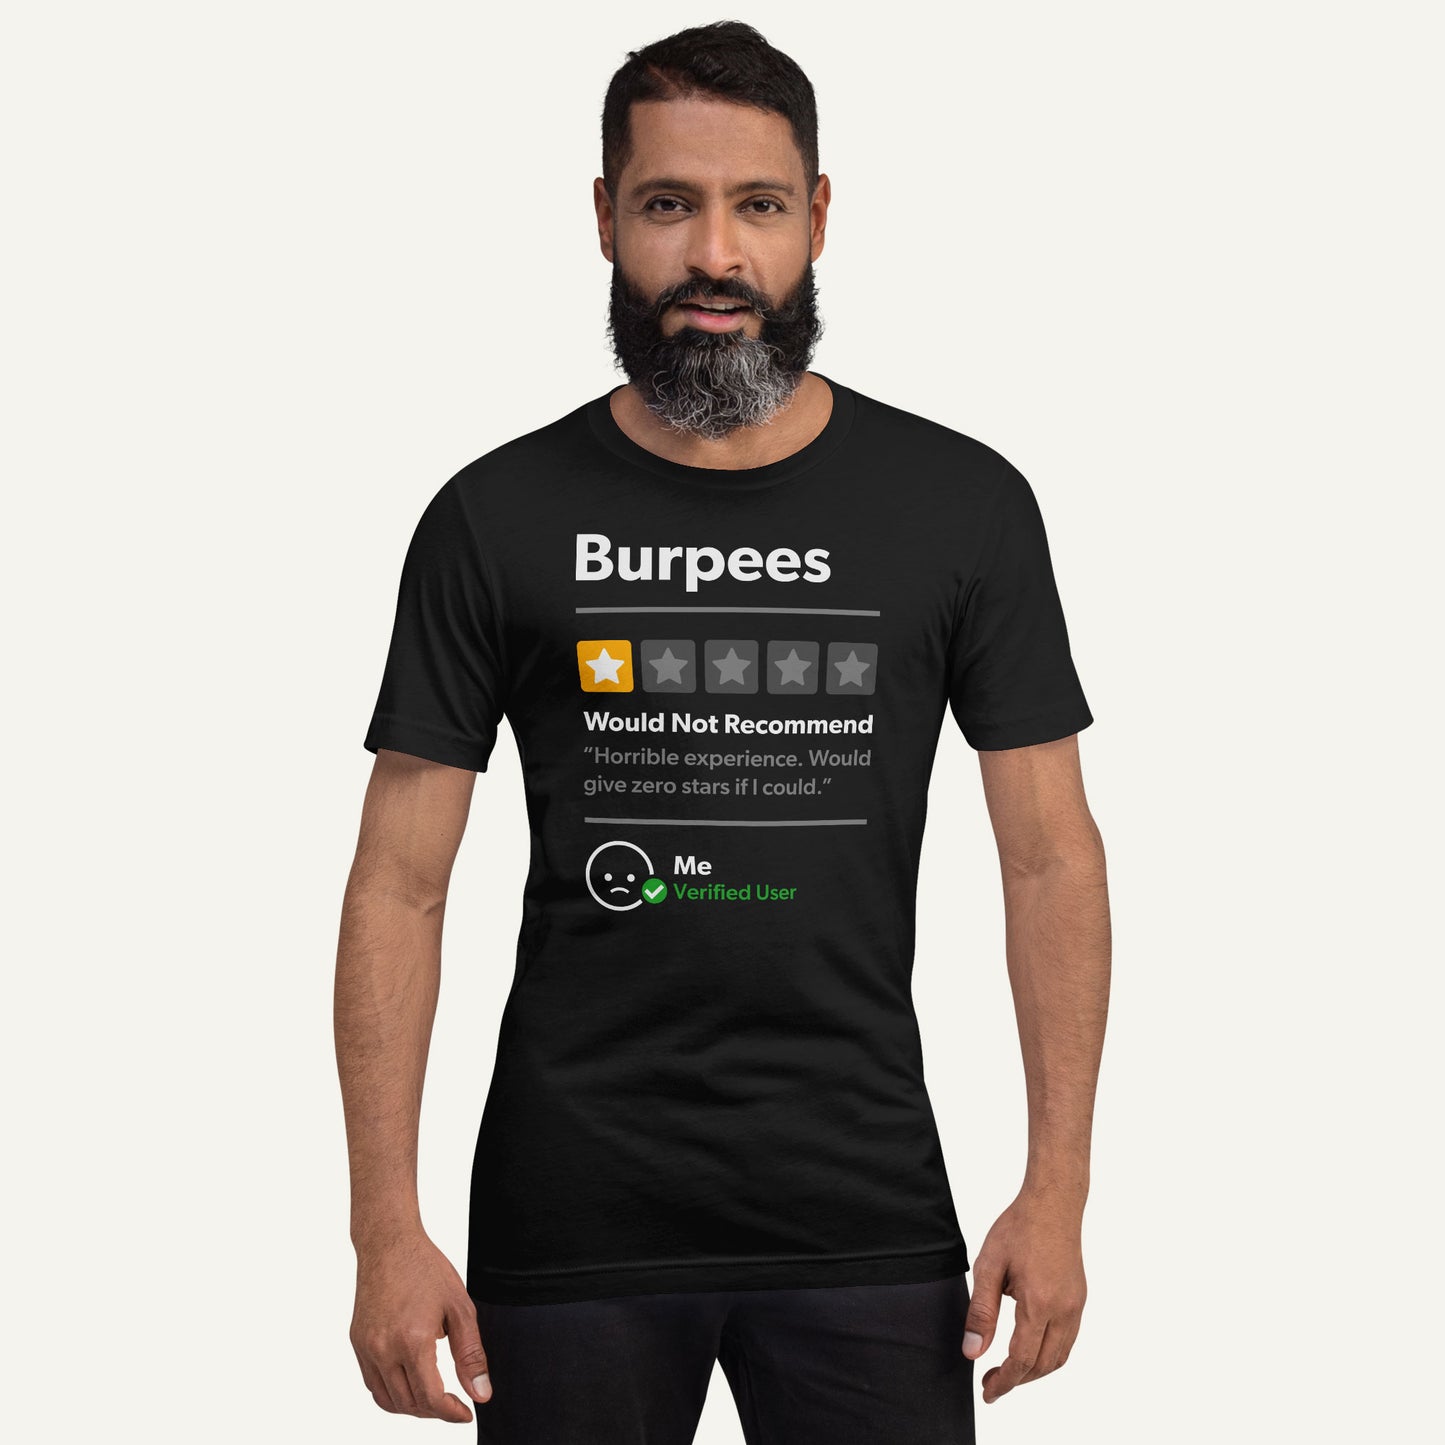 Burpees 1 Star Would Not Recommend Men's Standard T-Shirt